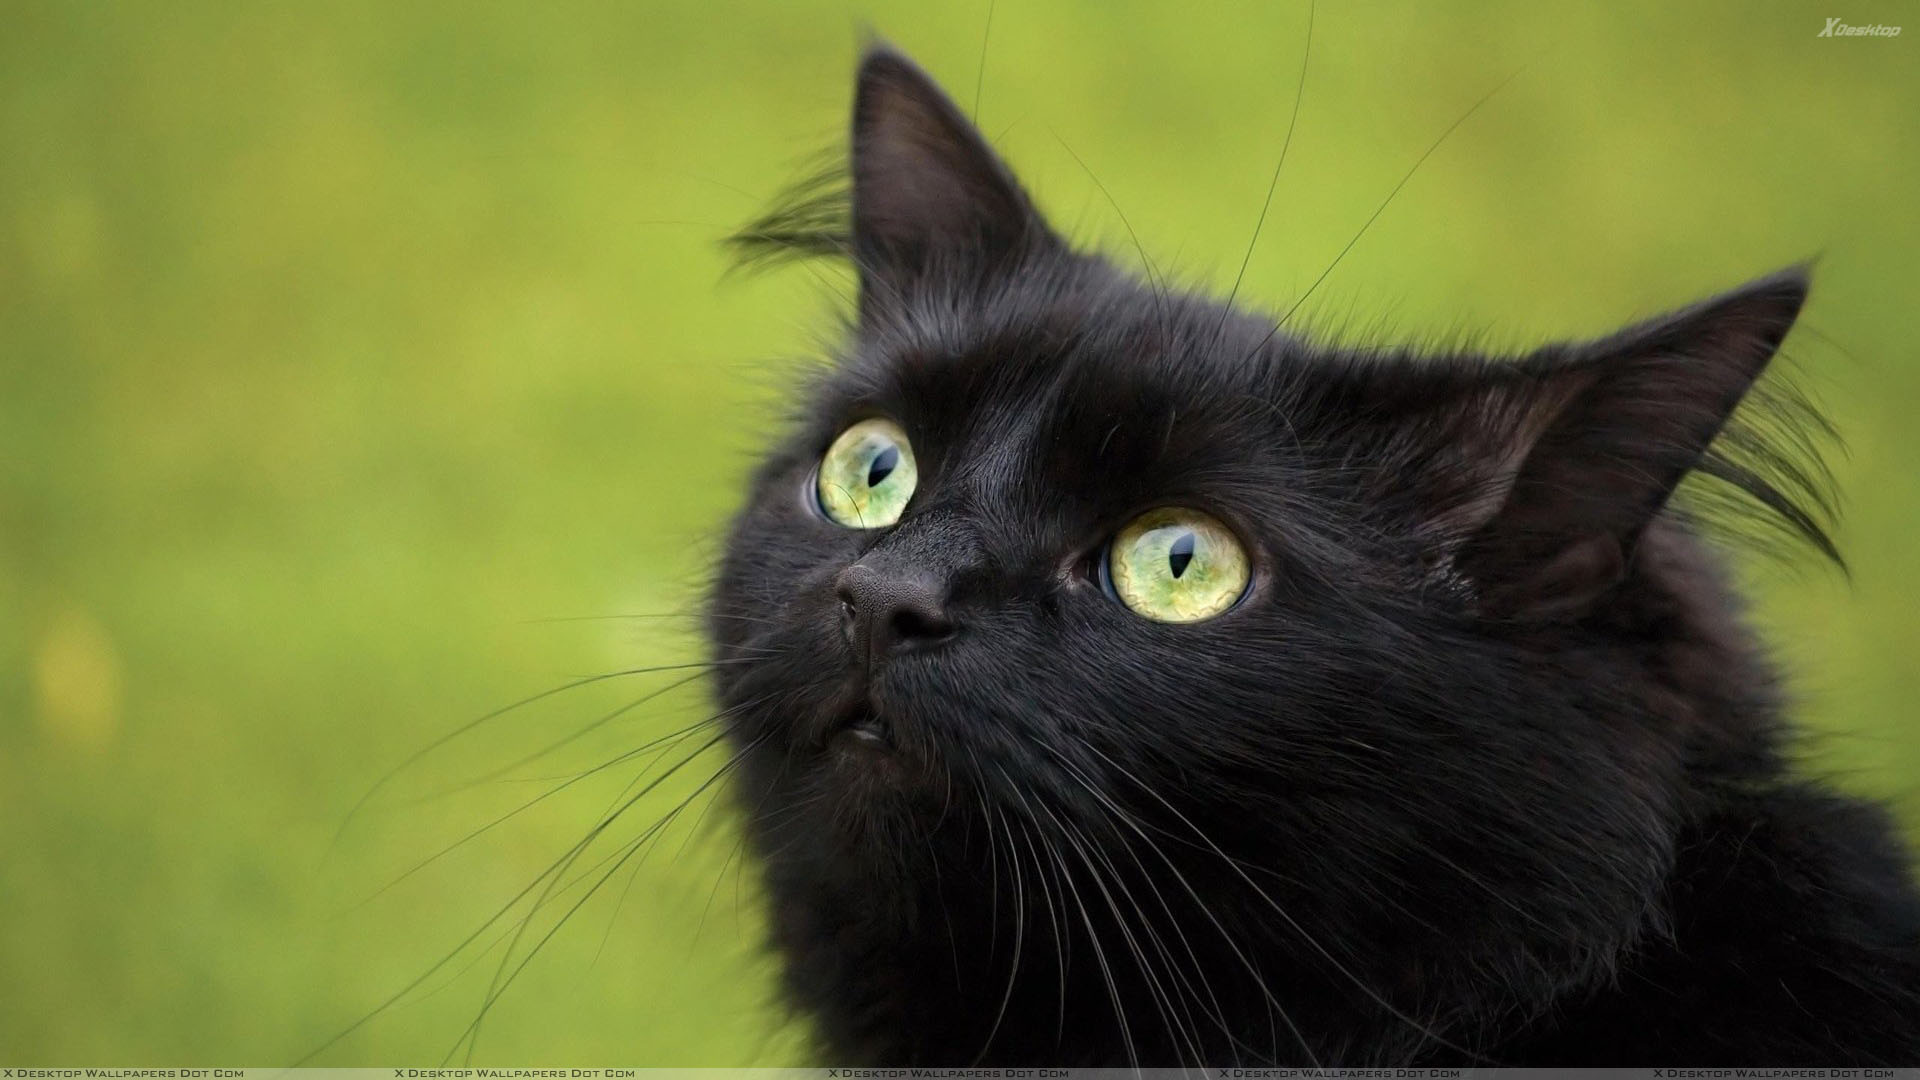 Black Cat In Green Eyes And Green Background Wallpaper 1920x1080